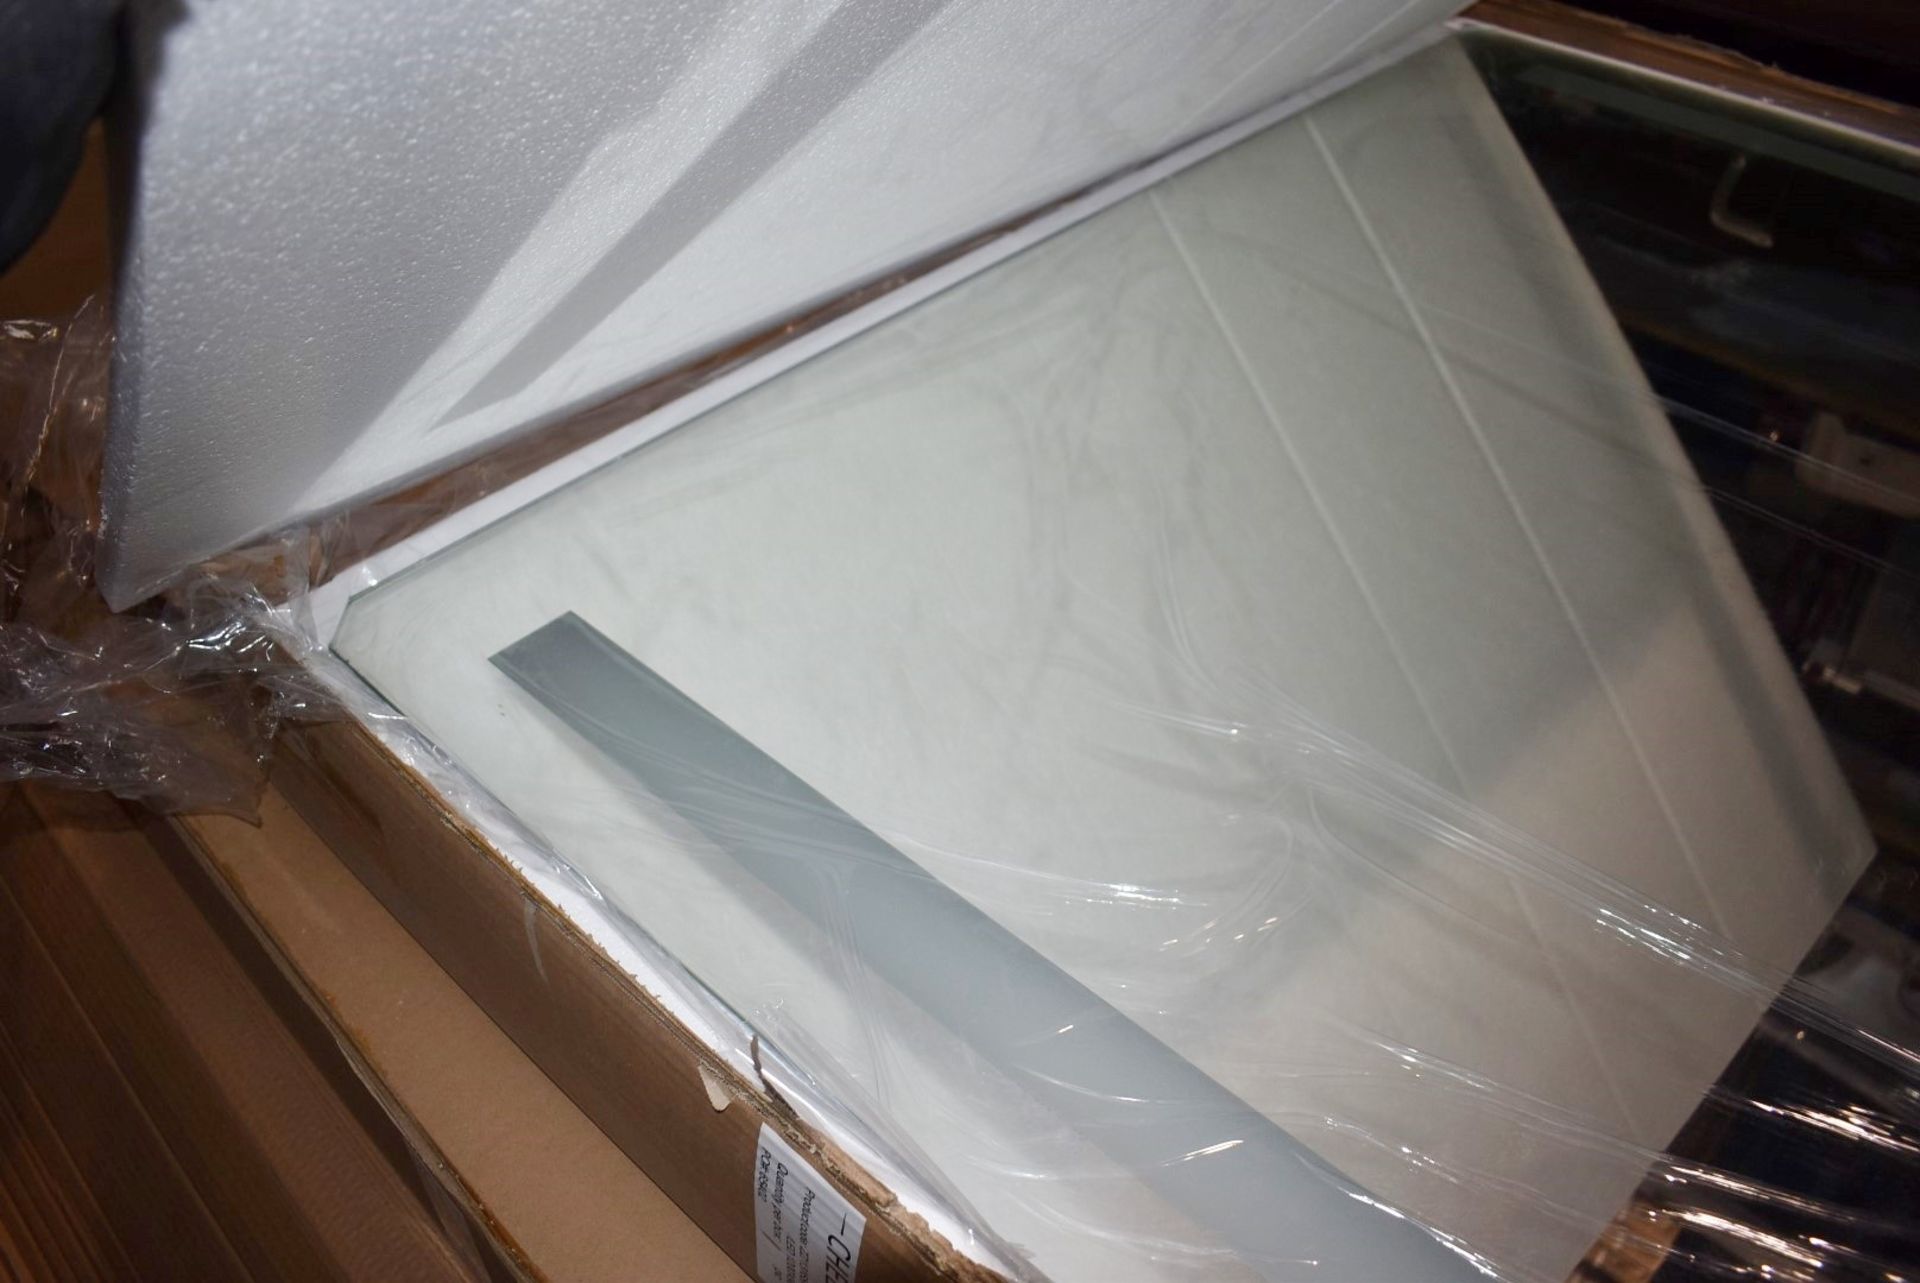 1 x Chelsom Large Illuminated LED Bathroom Mirror With Demister - Brand New Stock - As Used in Major - Image 11 of 14